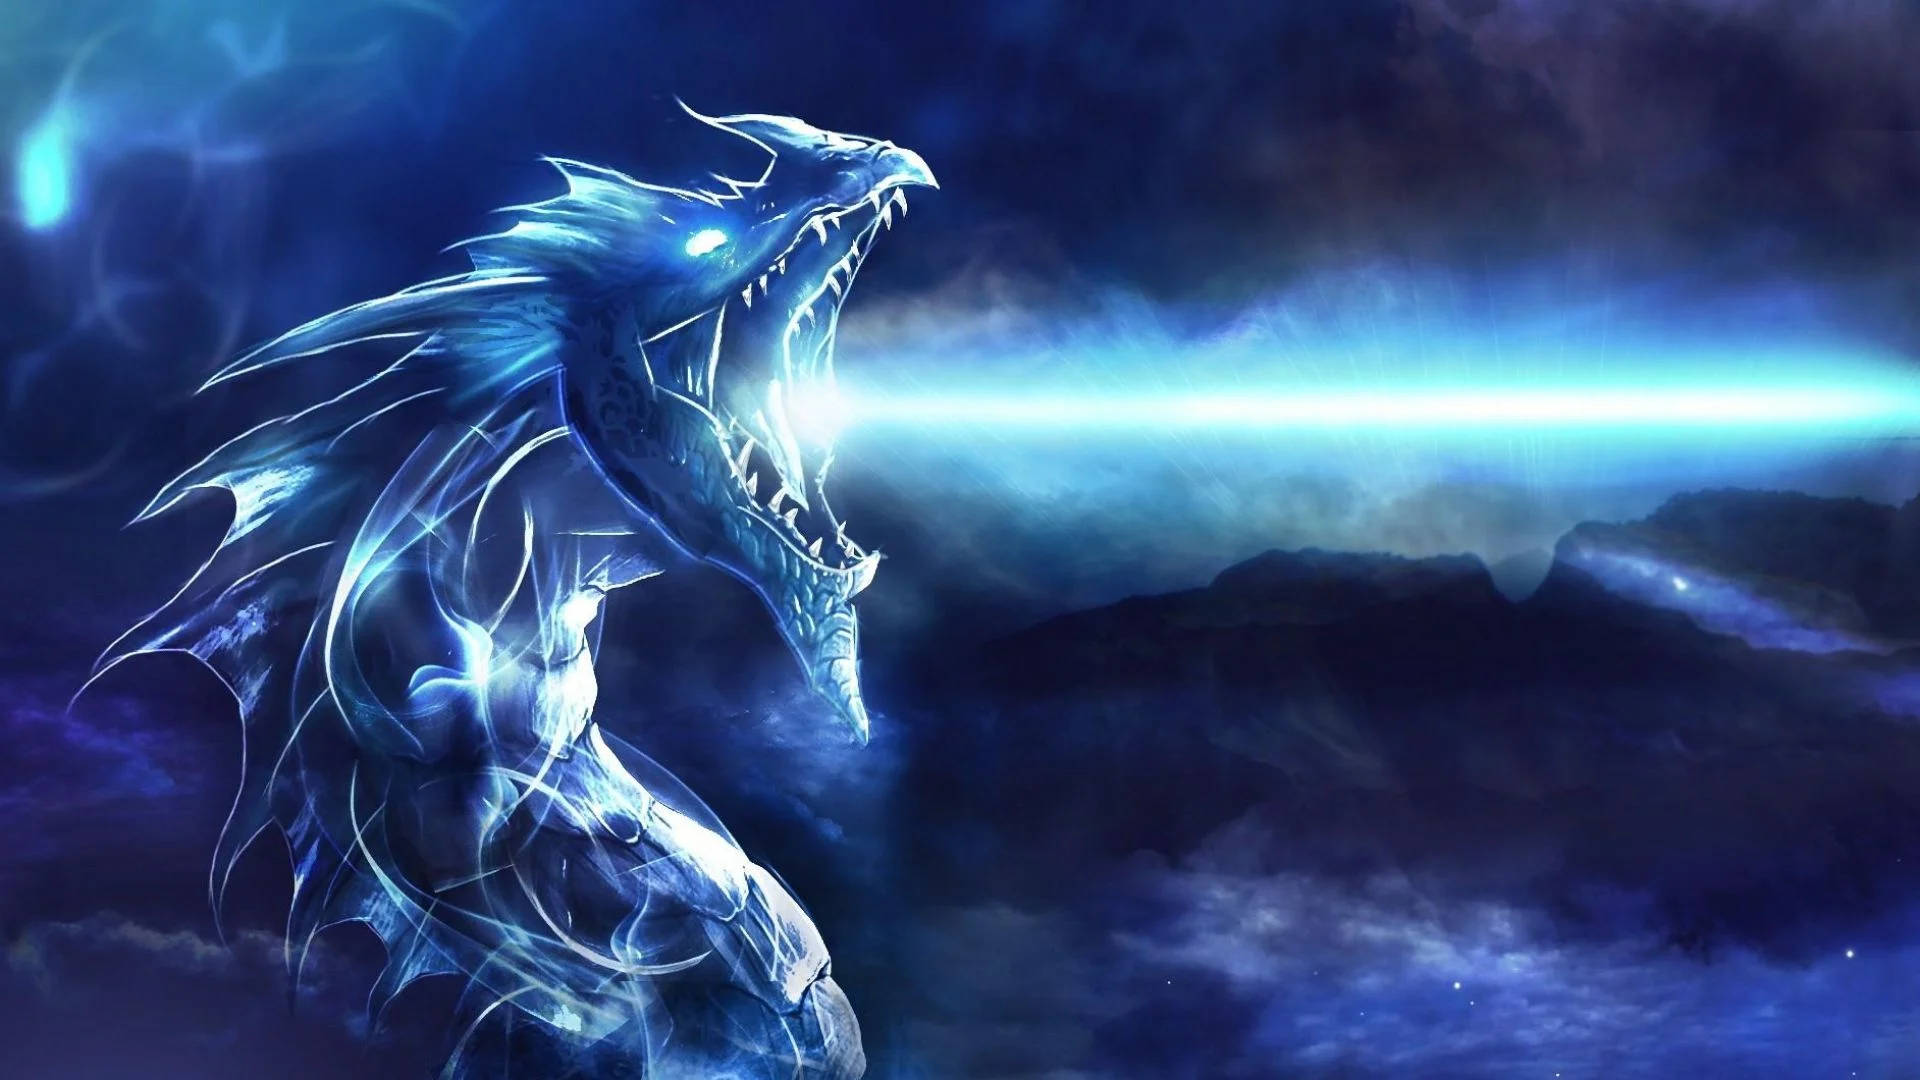 Blue-headed Light Dragon - A Mystical Creature In Night Sky Background